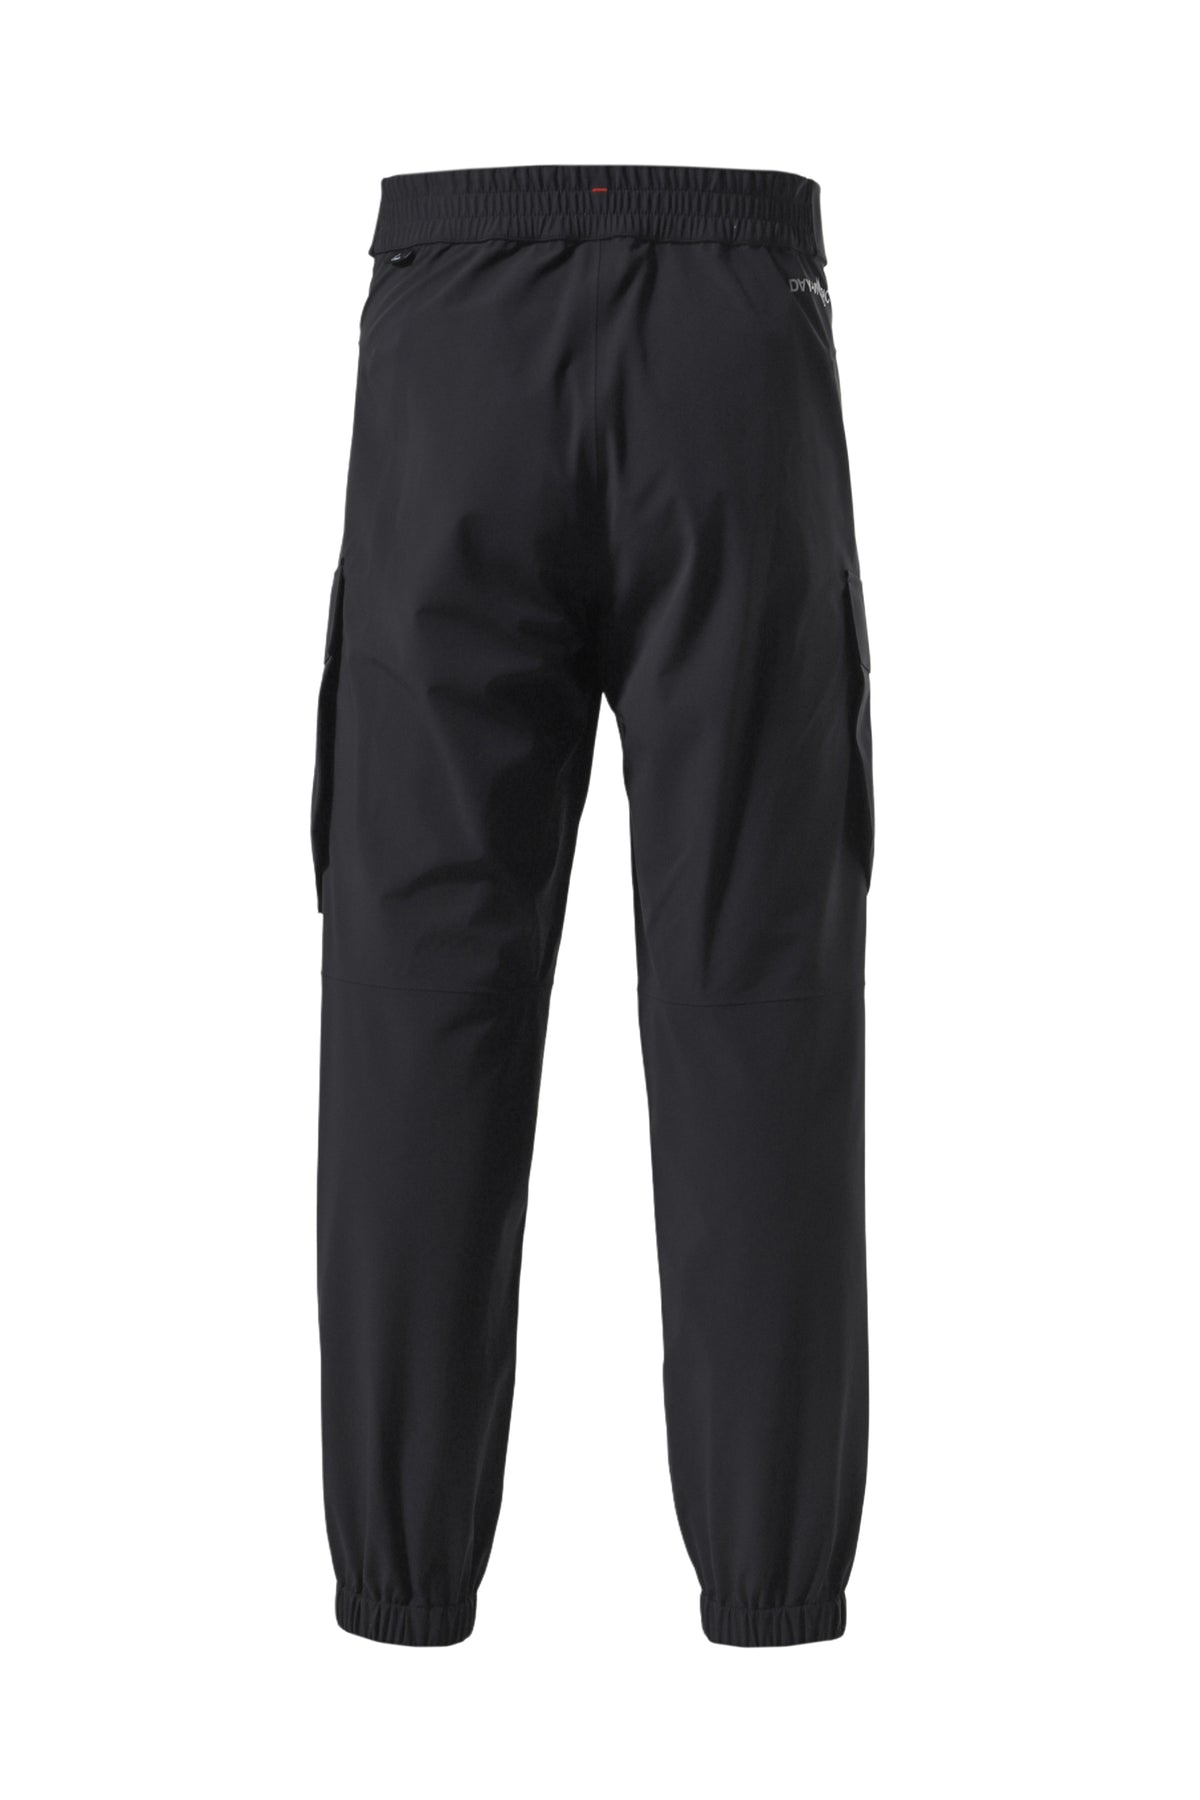 TROUSERS / BLK (999)